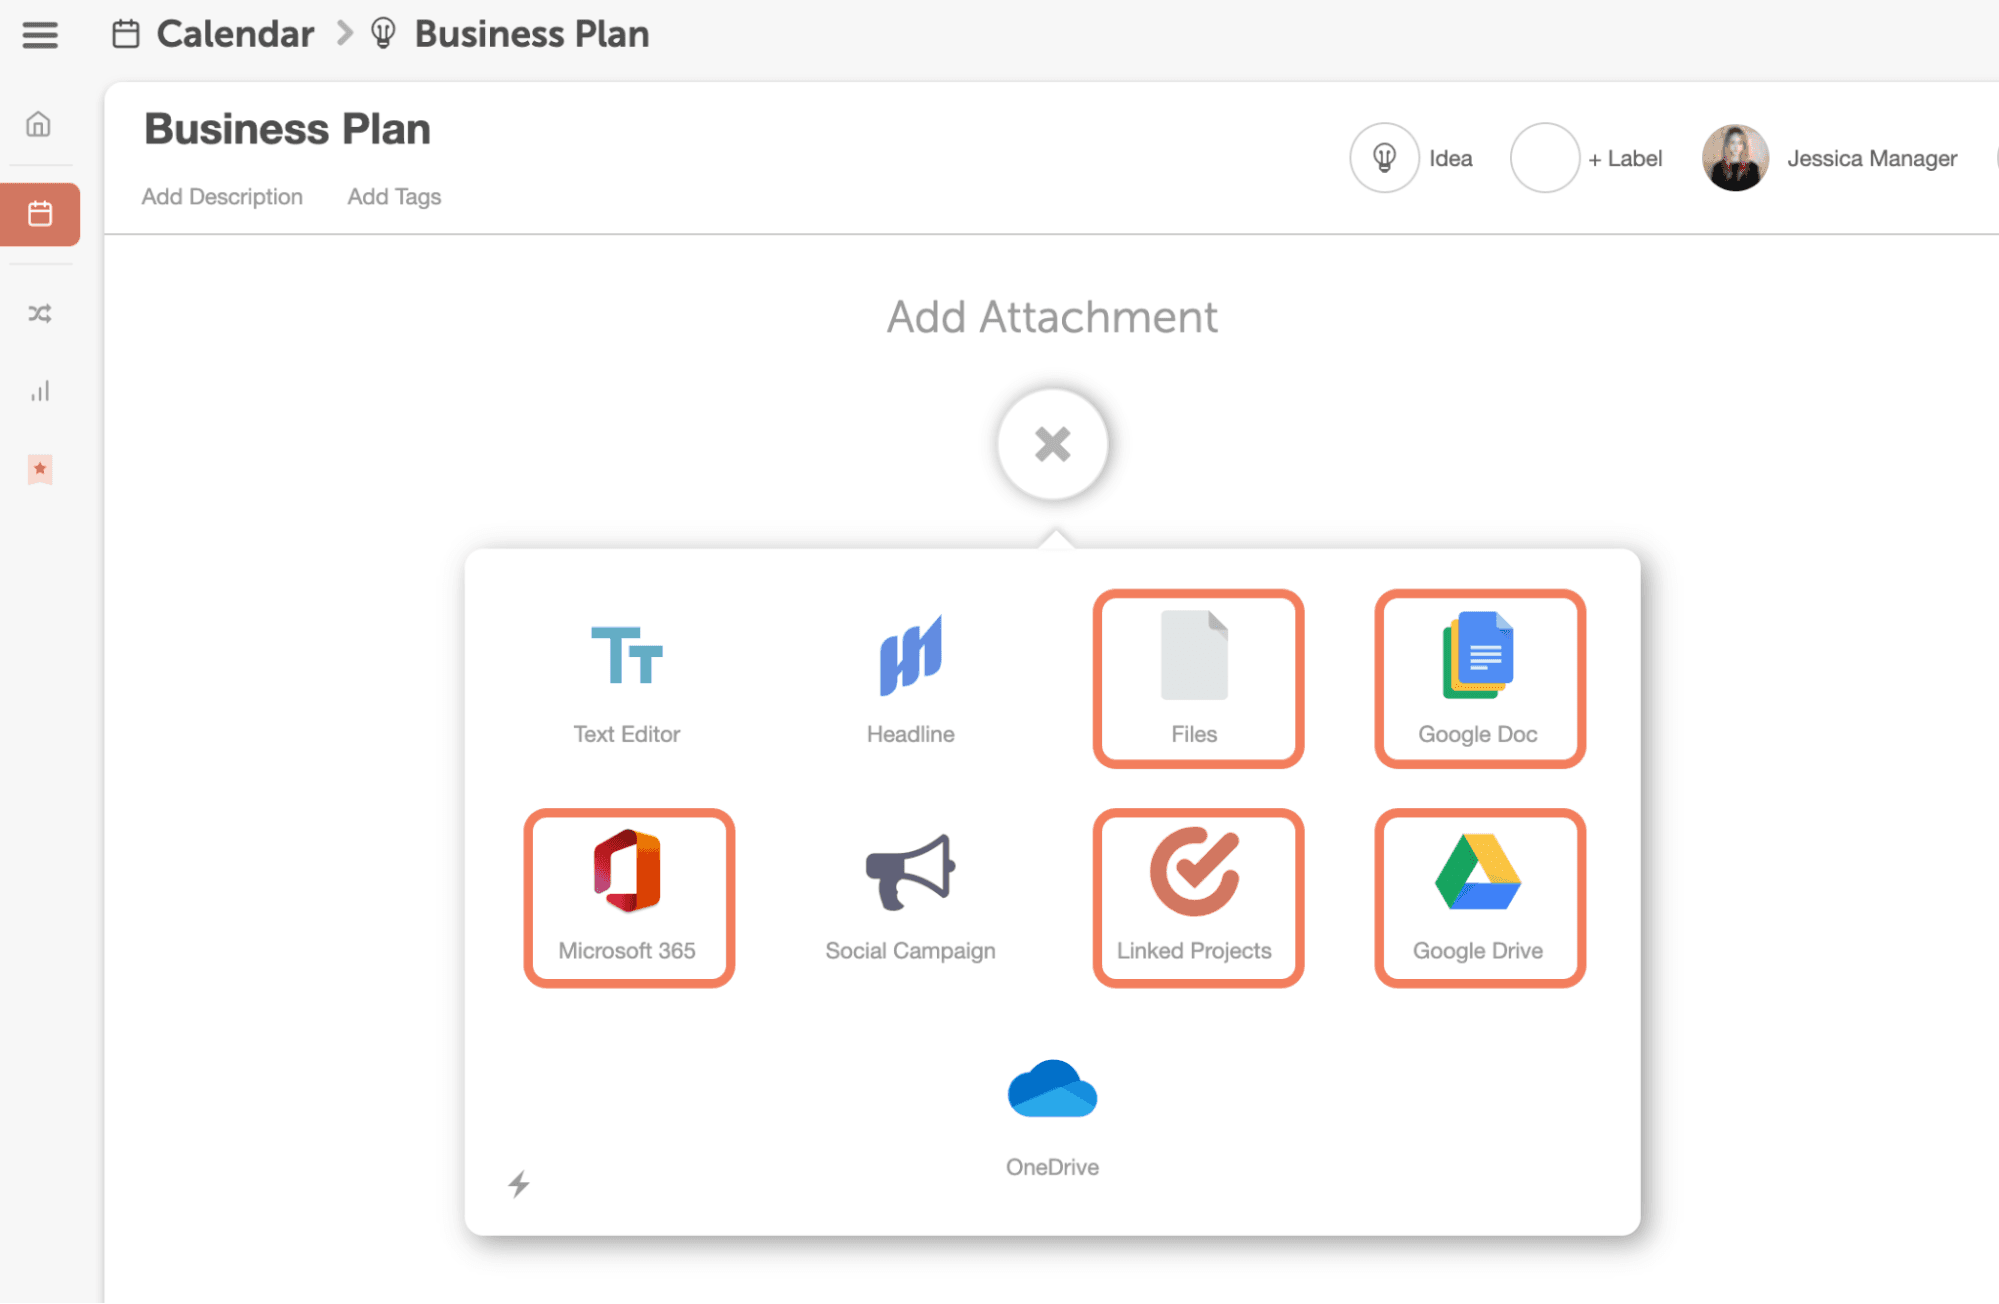 Add additional documents to your project under add attachment.